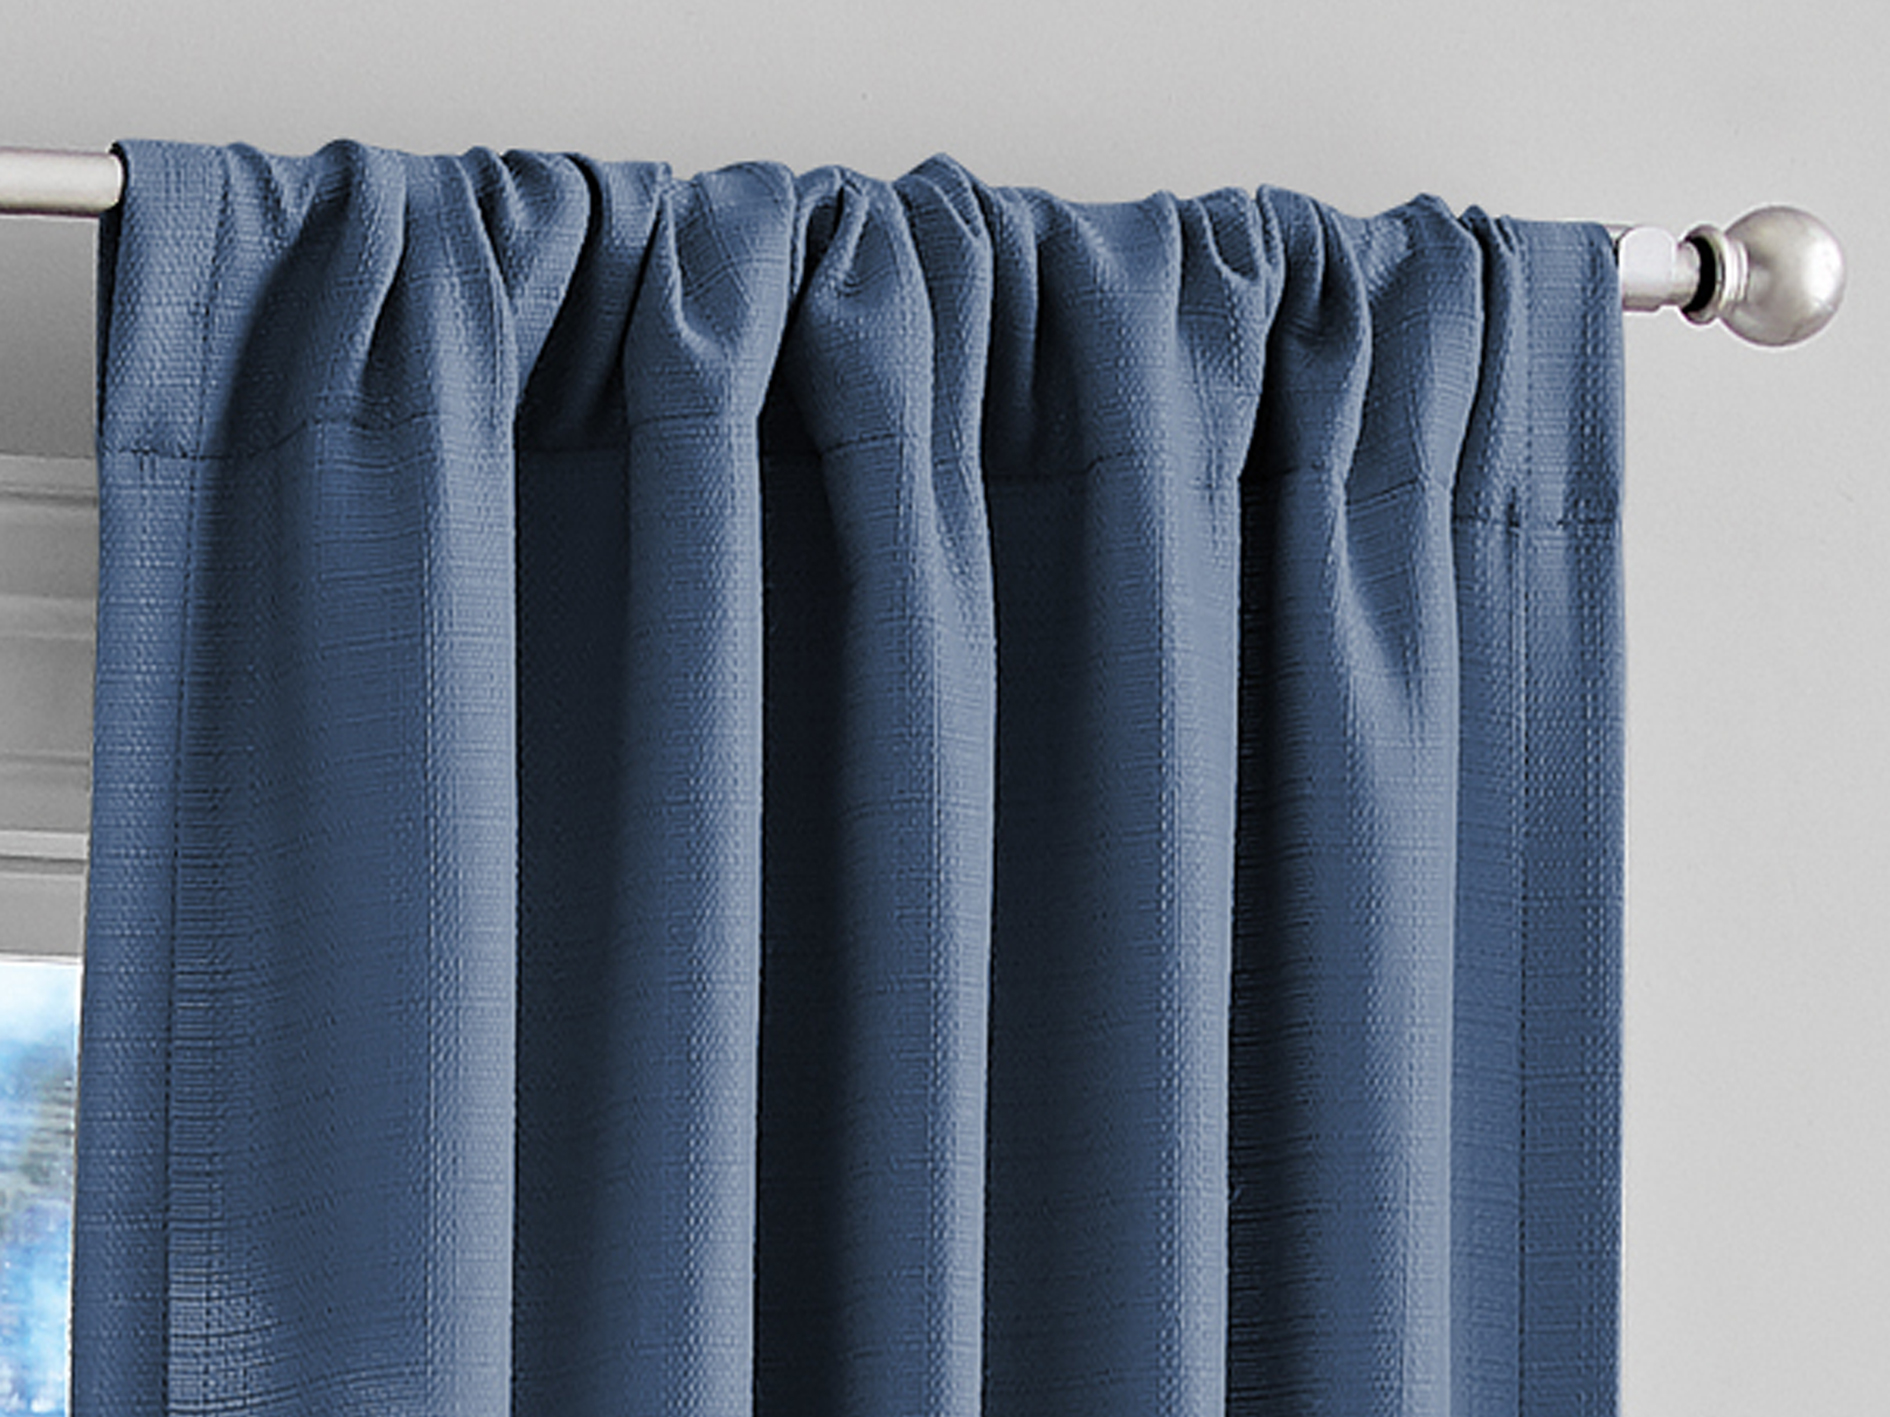 Mainstays Southport Solid Color Light Filtering Rod Pocket Curtain Panel Pair, Set of 2, Blue, 40 x 84 - image 4 of 5